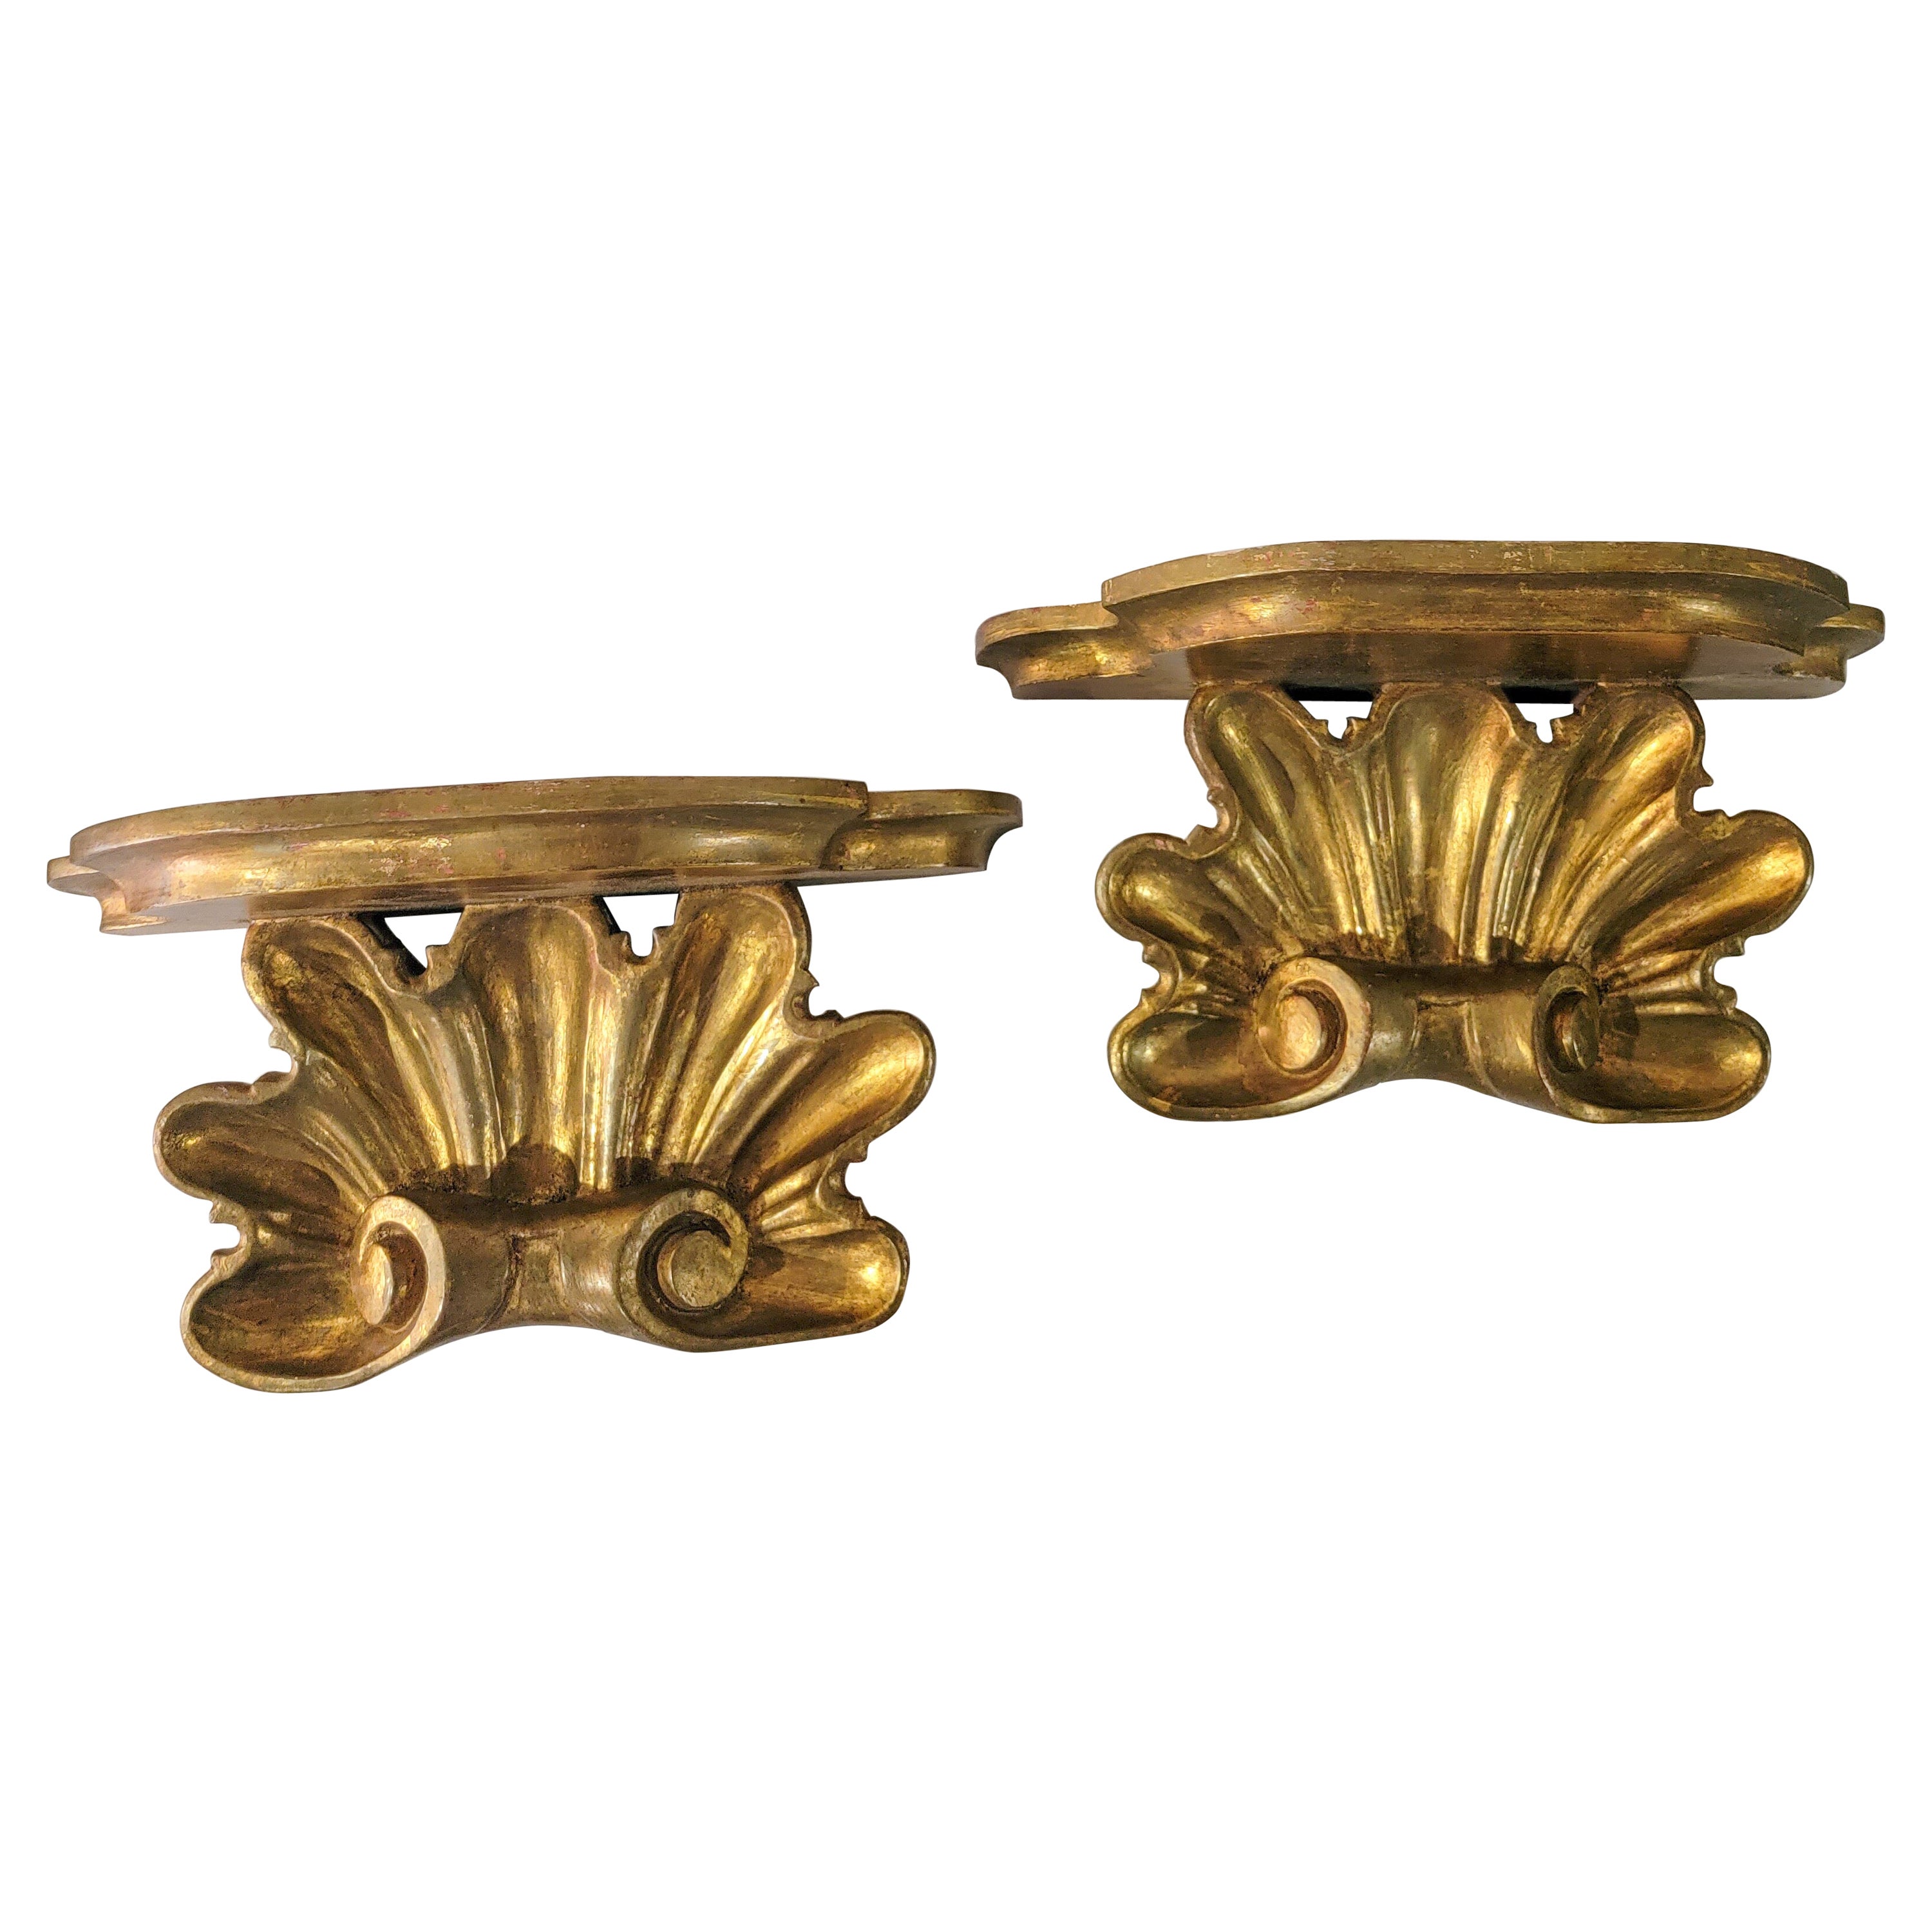 Early 20th-C. Italian Carved Giltwood Rococo Style Shell Form Brackets, Pair